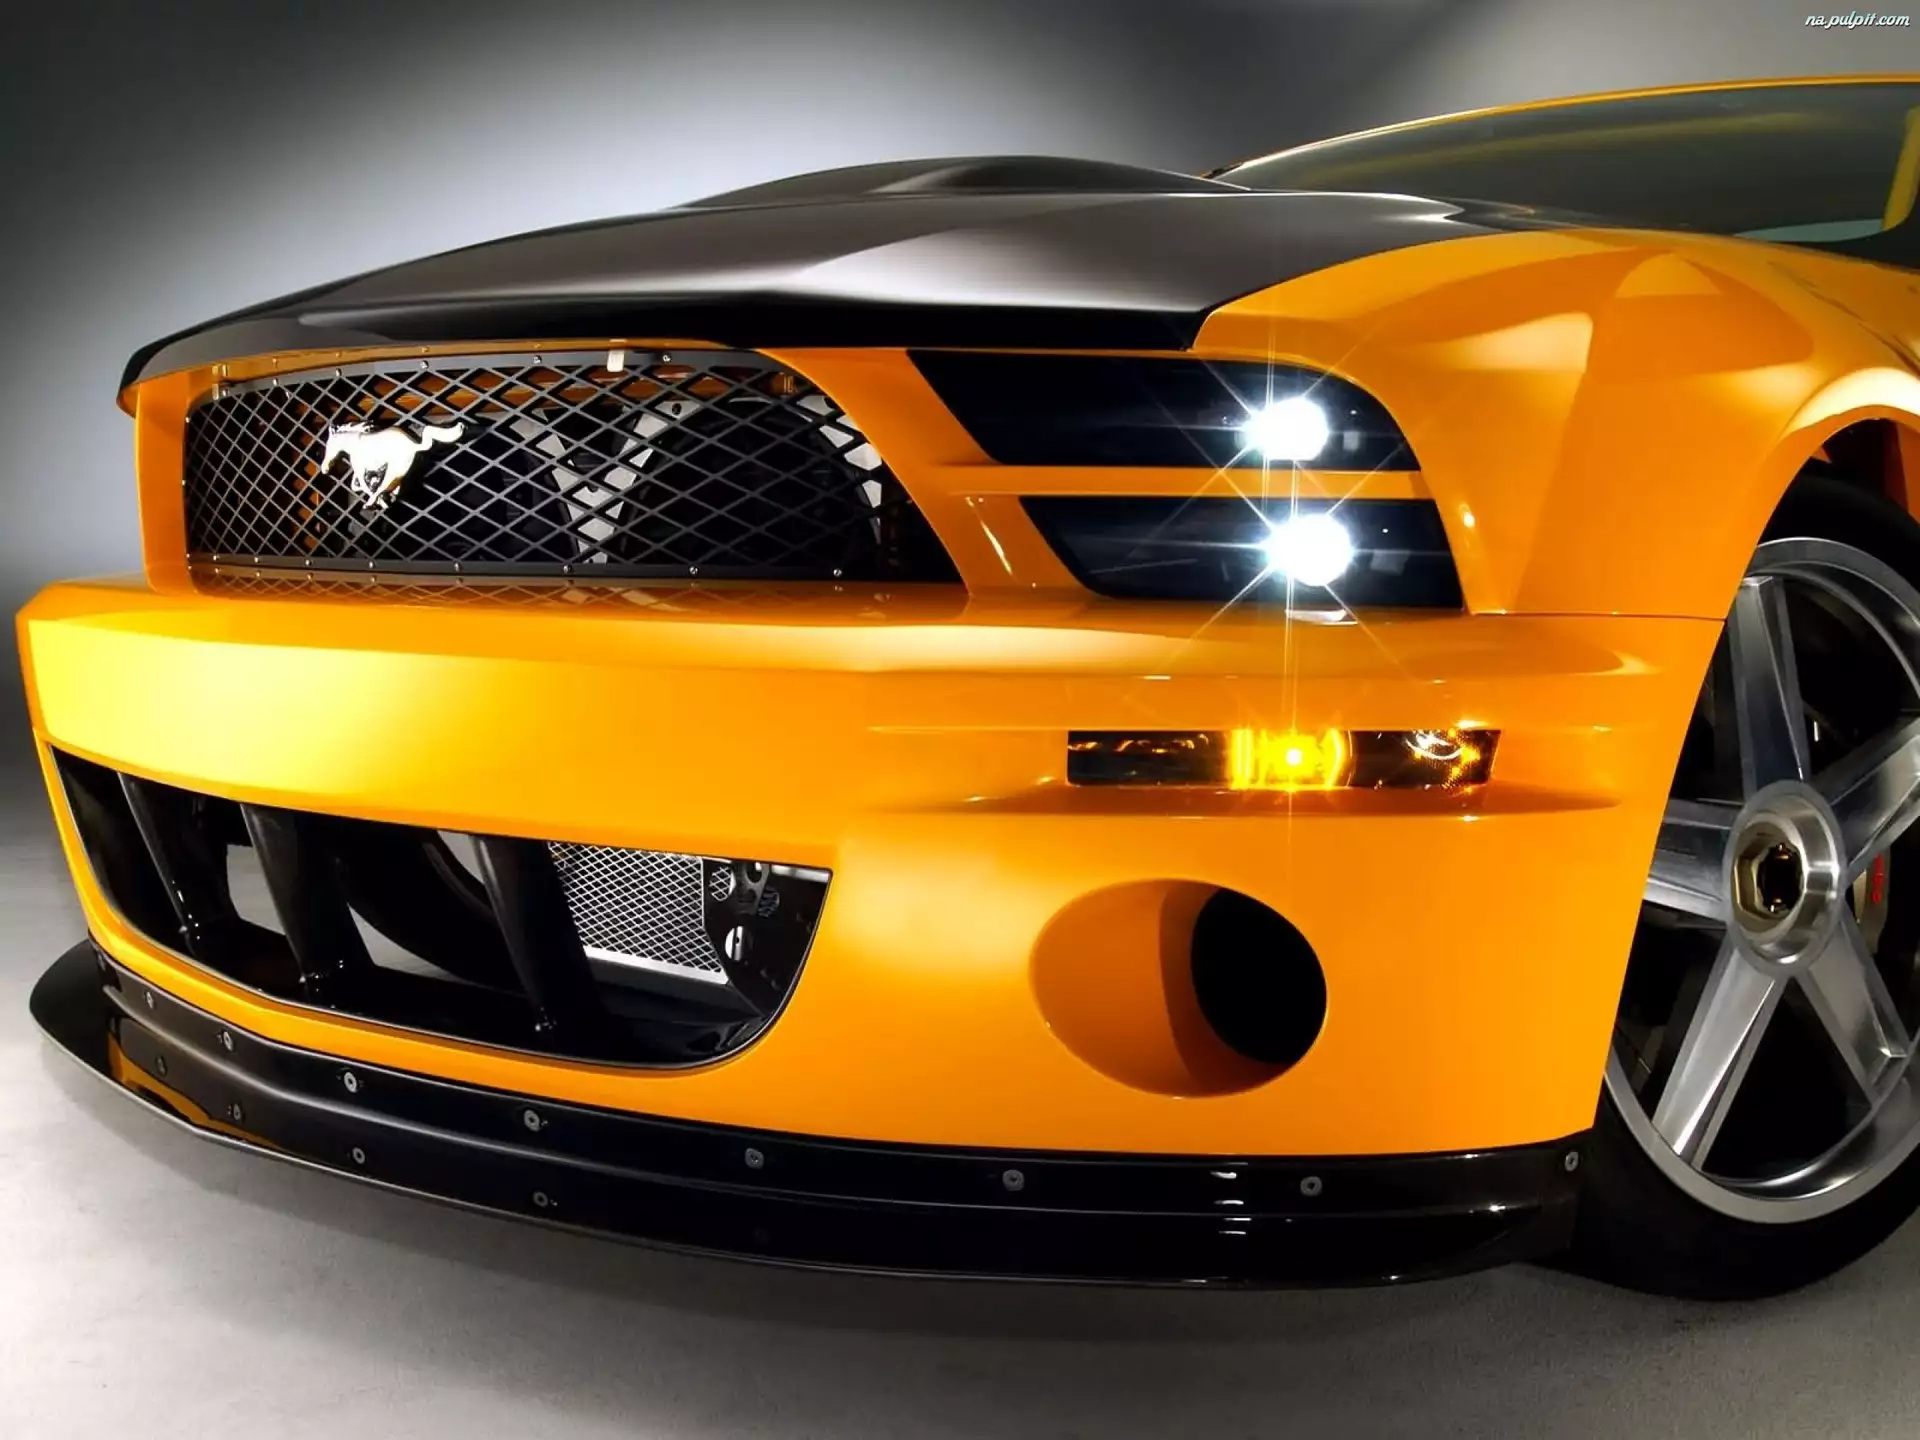 Ksenony, Ford Mustang, Grill